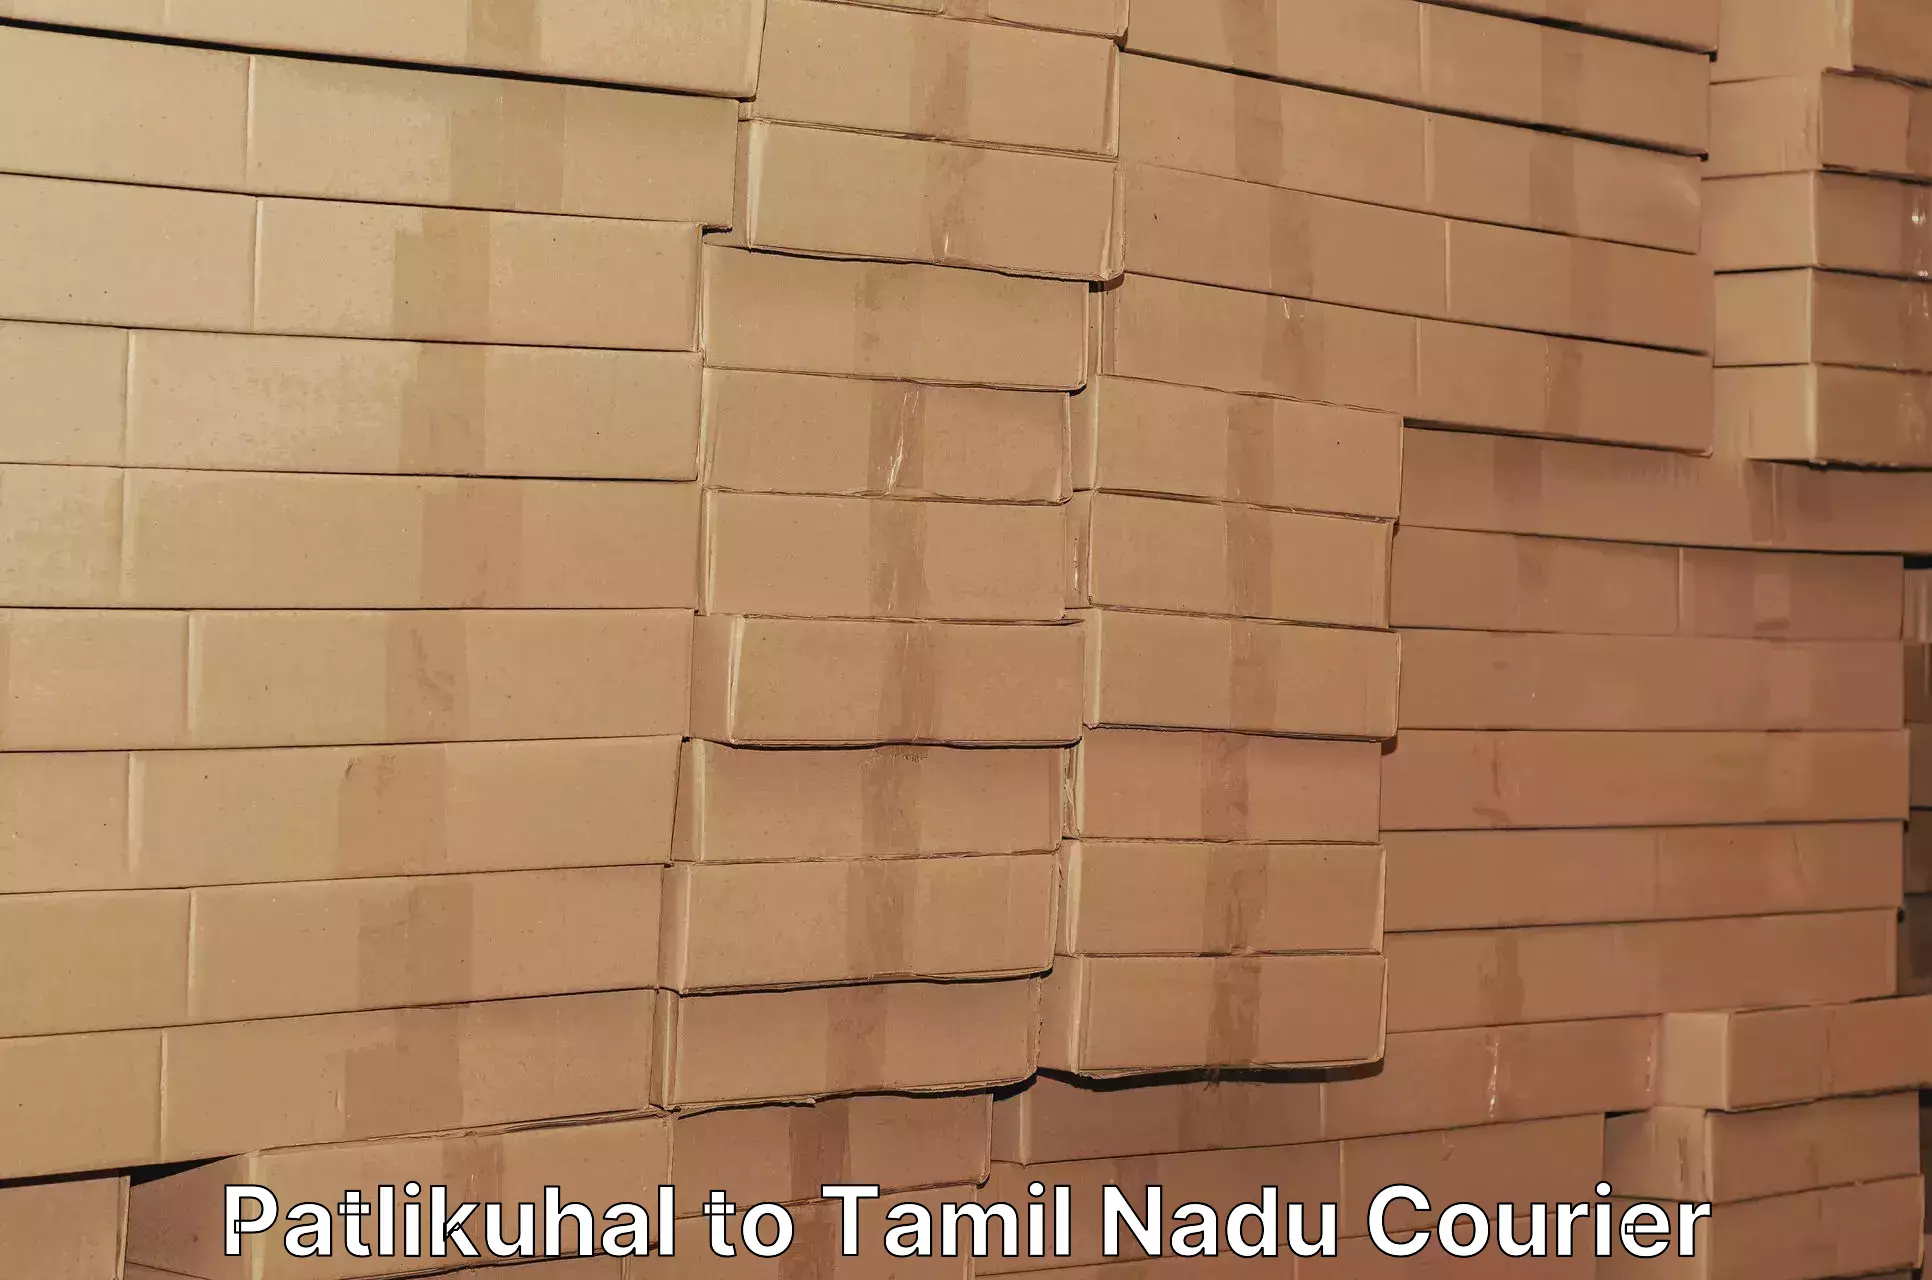 Overnight delivery services Patlikuhal to Tamil Nadu